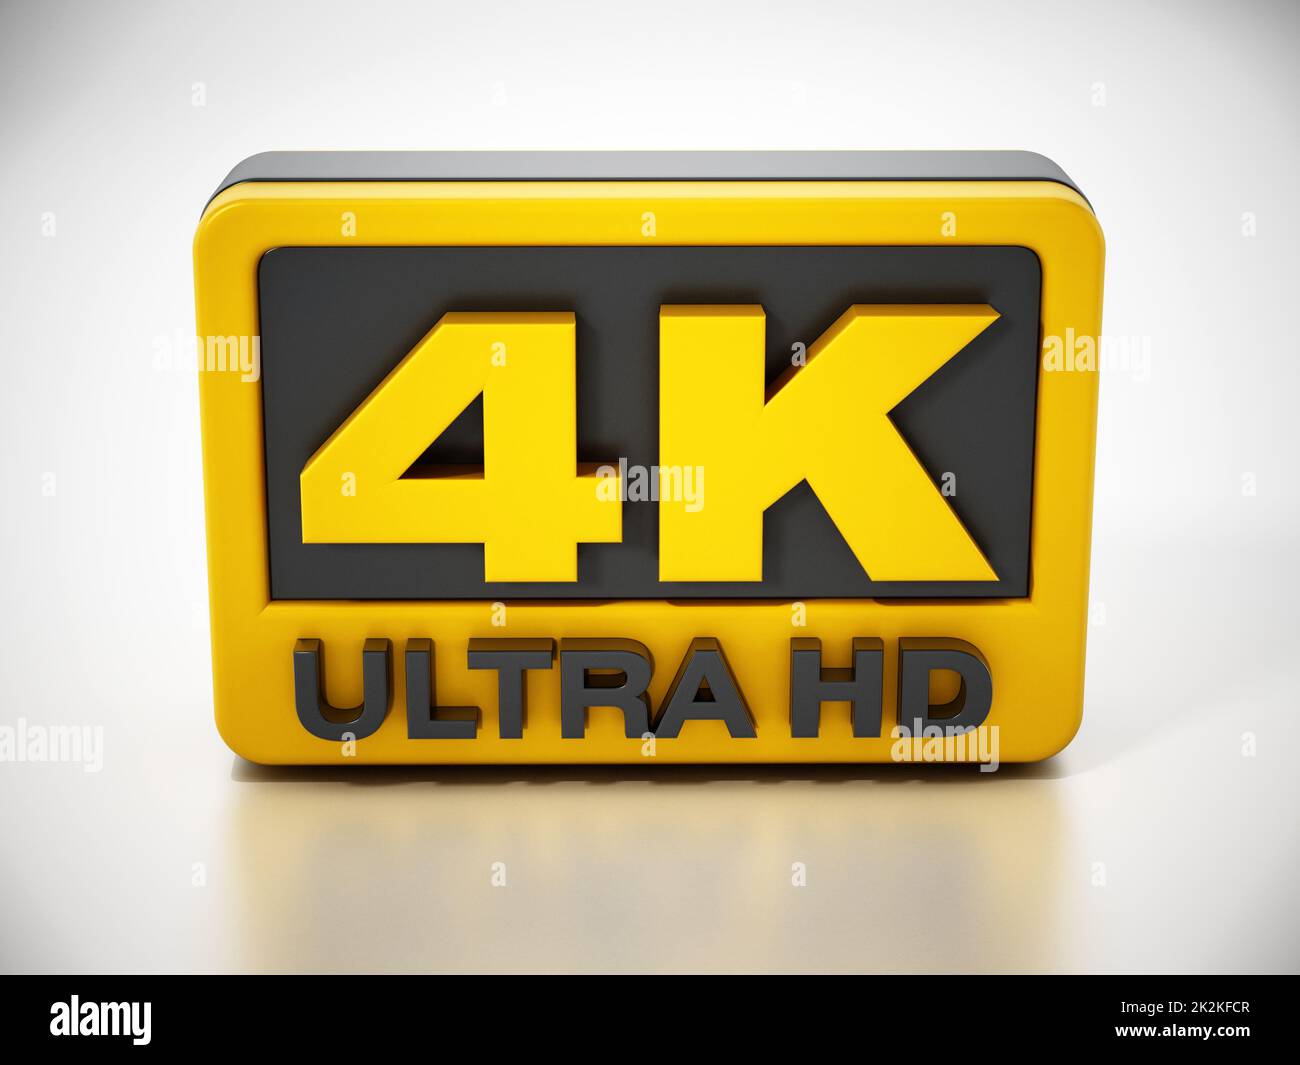 4K ultra HD icon isolated on white background. 3D illustration Stock Photo